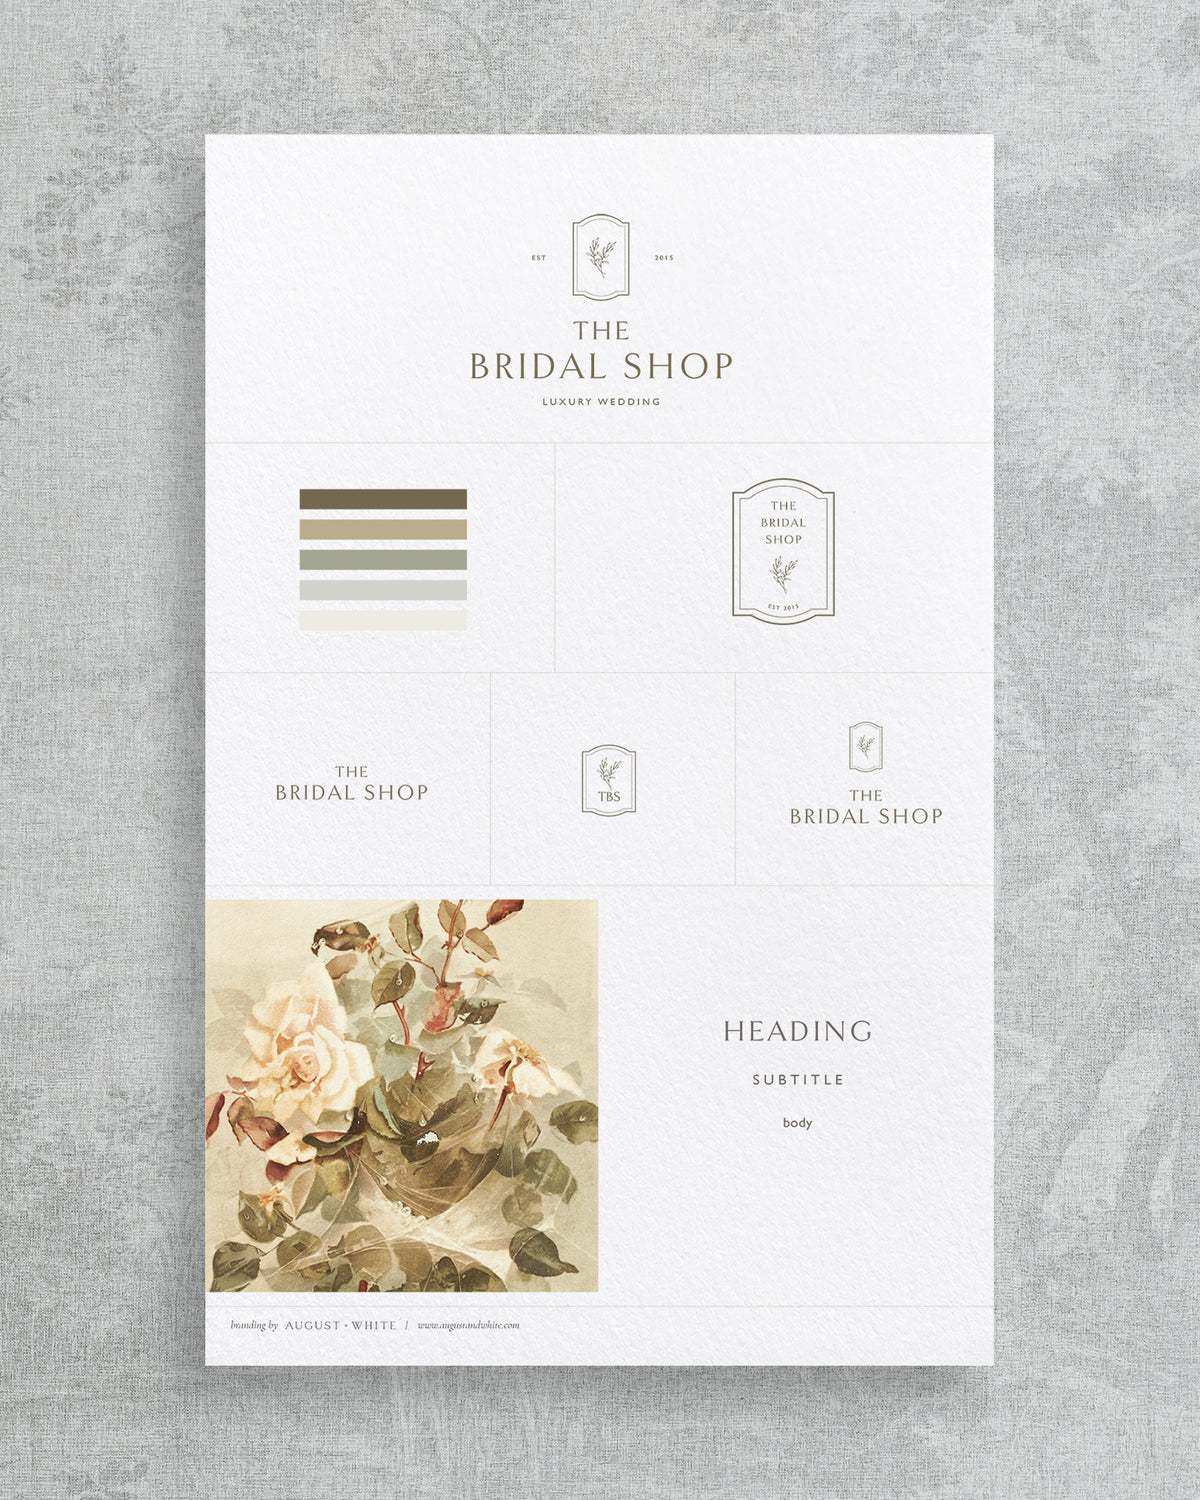 The Bridal Shop Branding Package